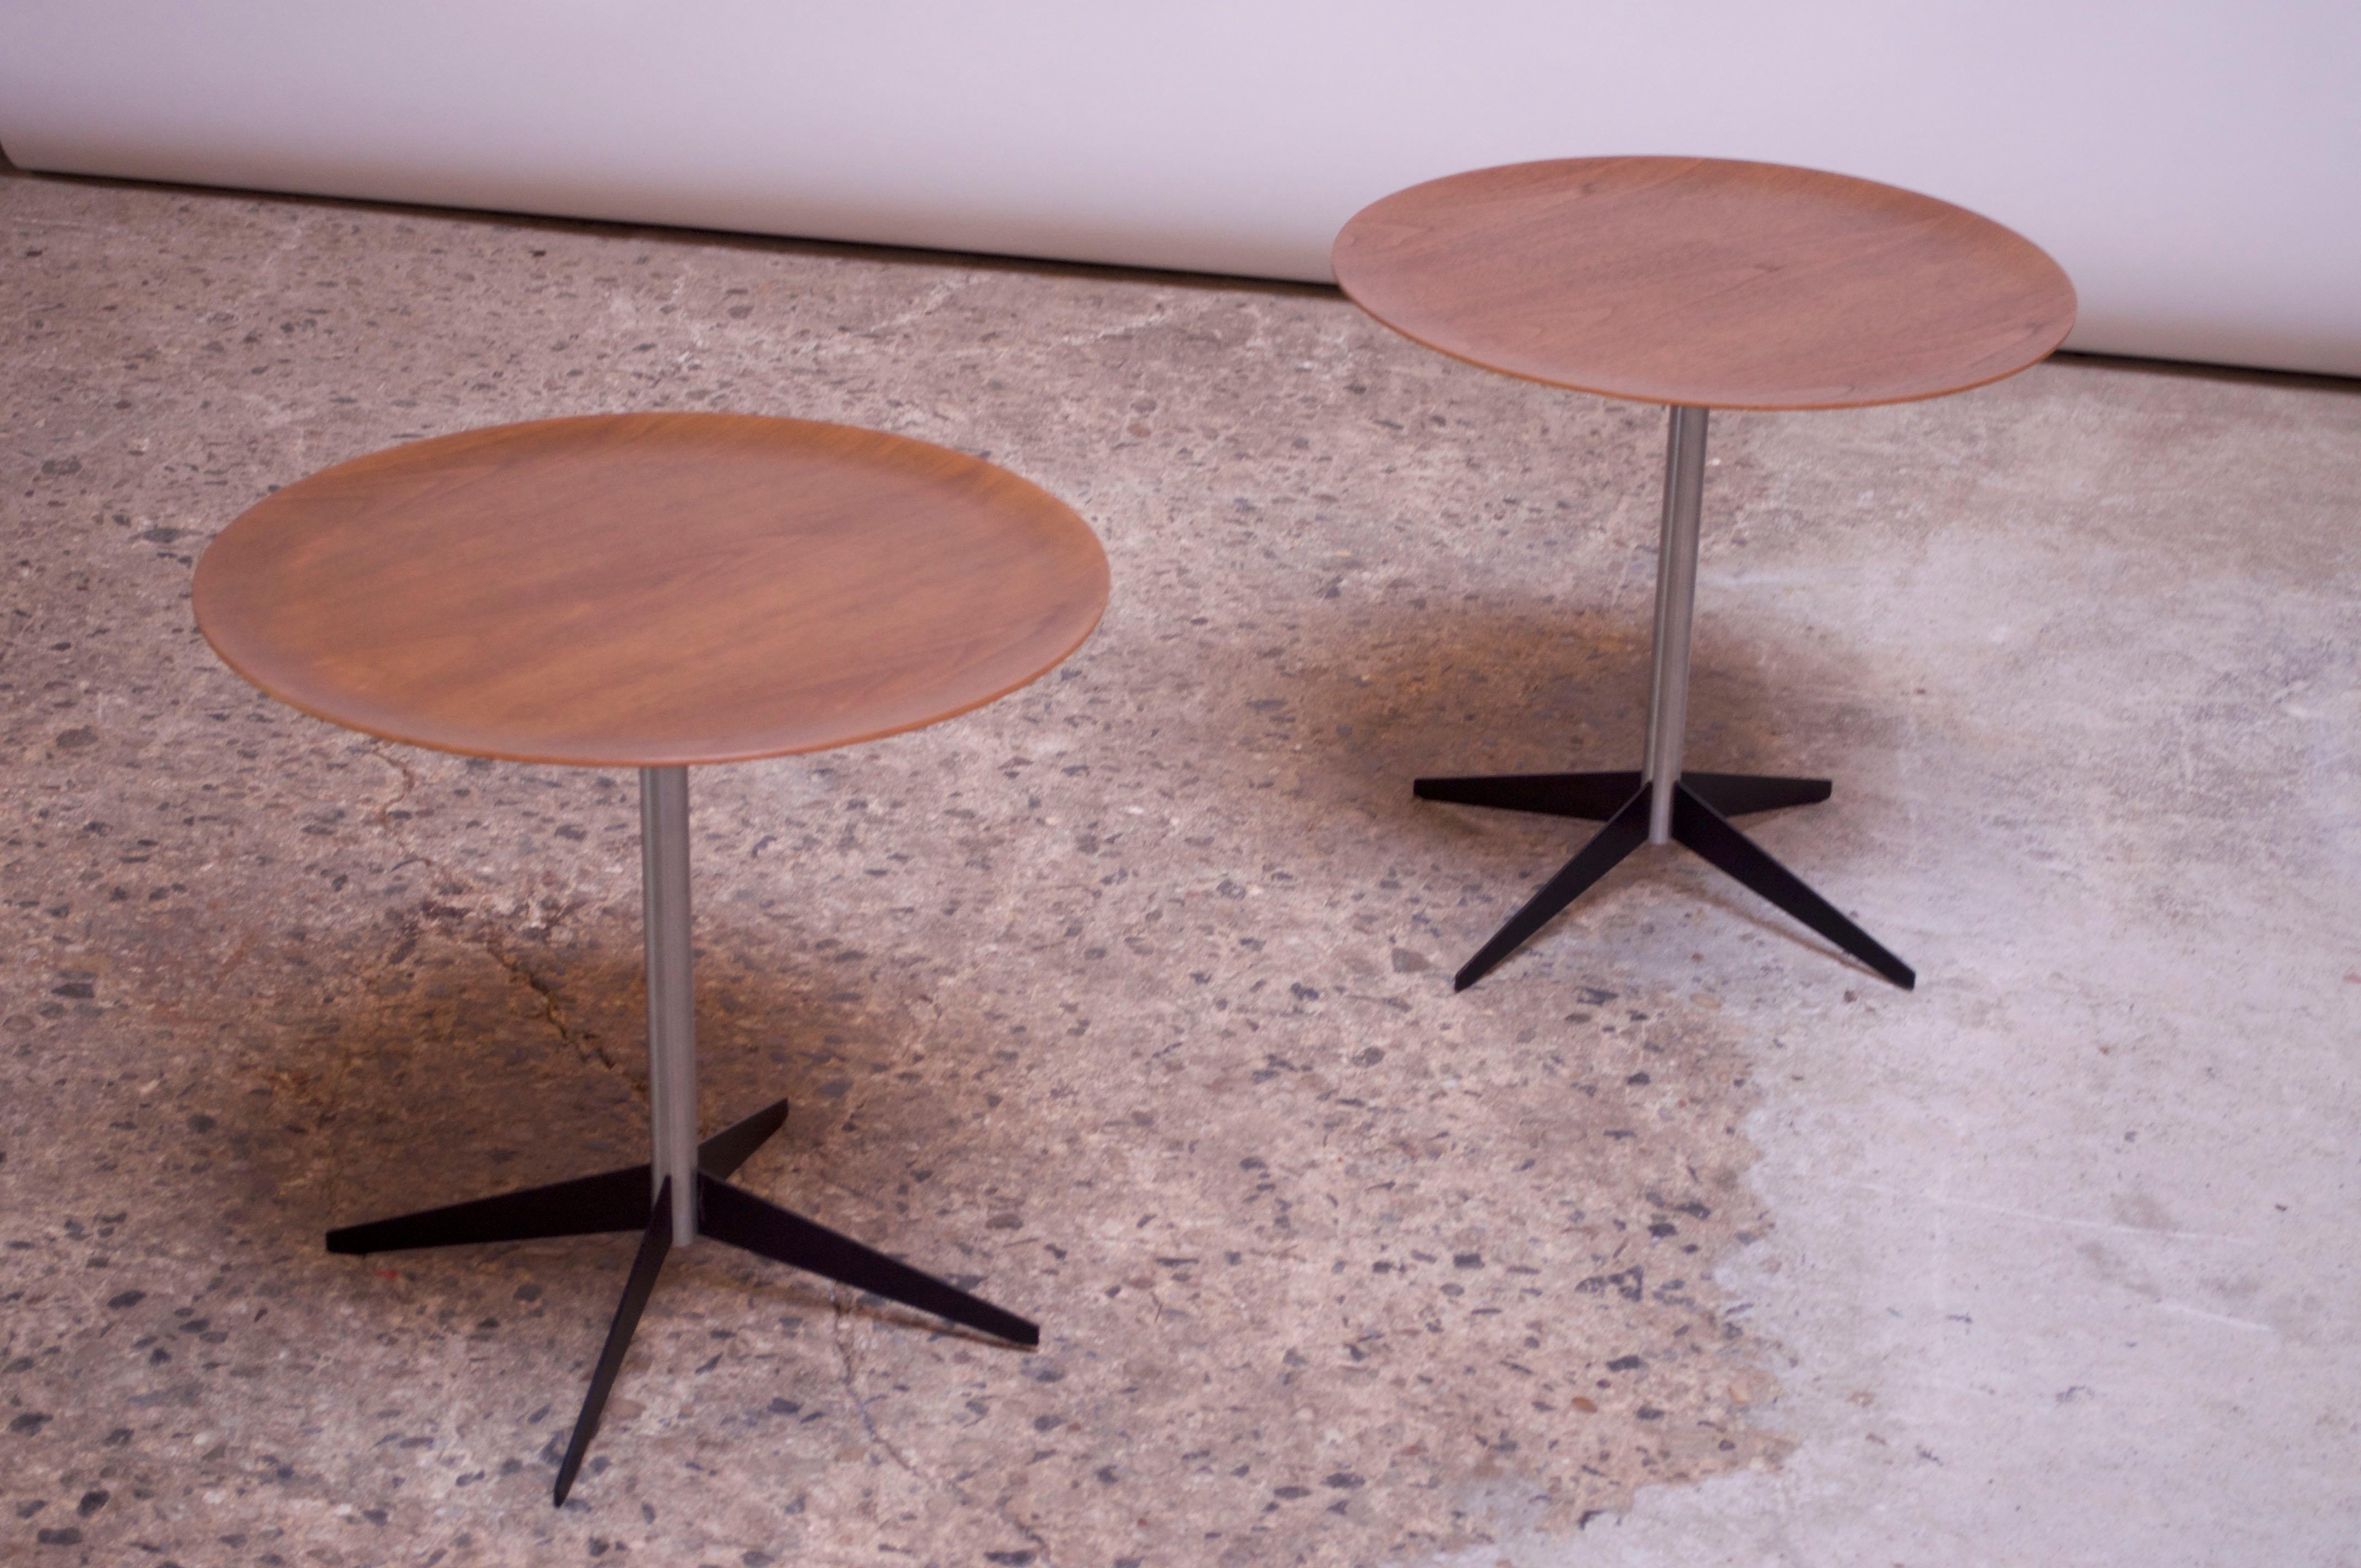 Uncommon pair of tray / drink tables designed by George Nelson & Associates for Herman Miller circa 1955. Composed of circular tops in walnut plywood with matte chrome-plated steel stems and black, enameled-steel bases. 
Excellent, vintage condition